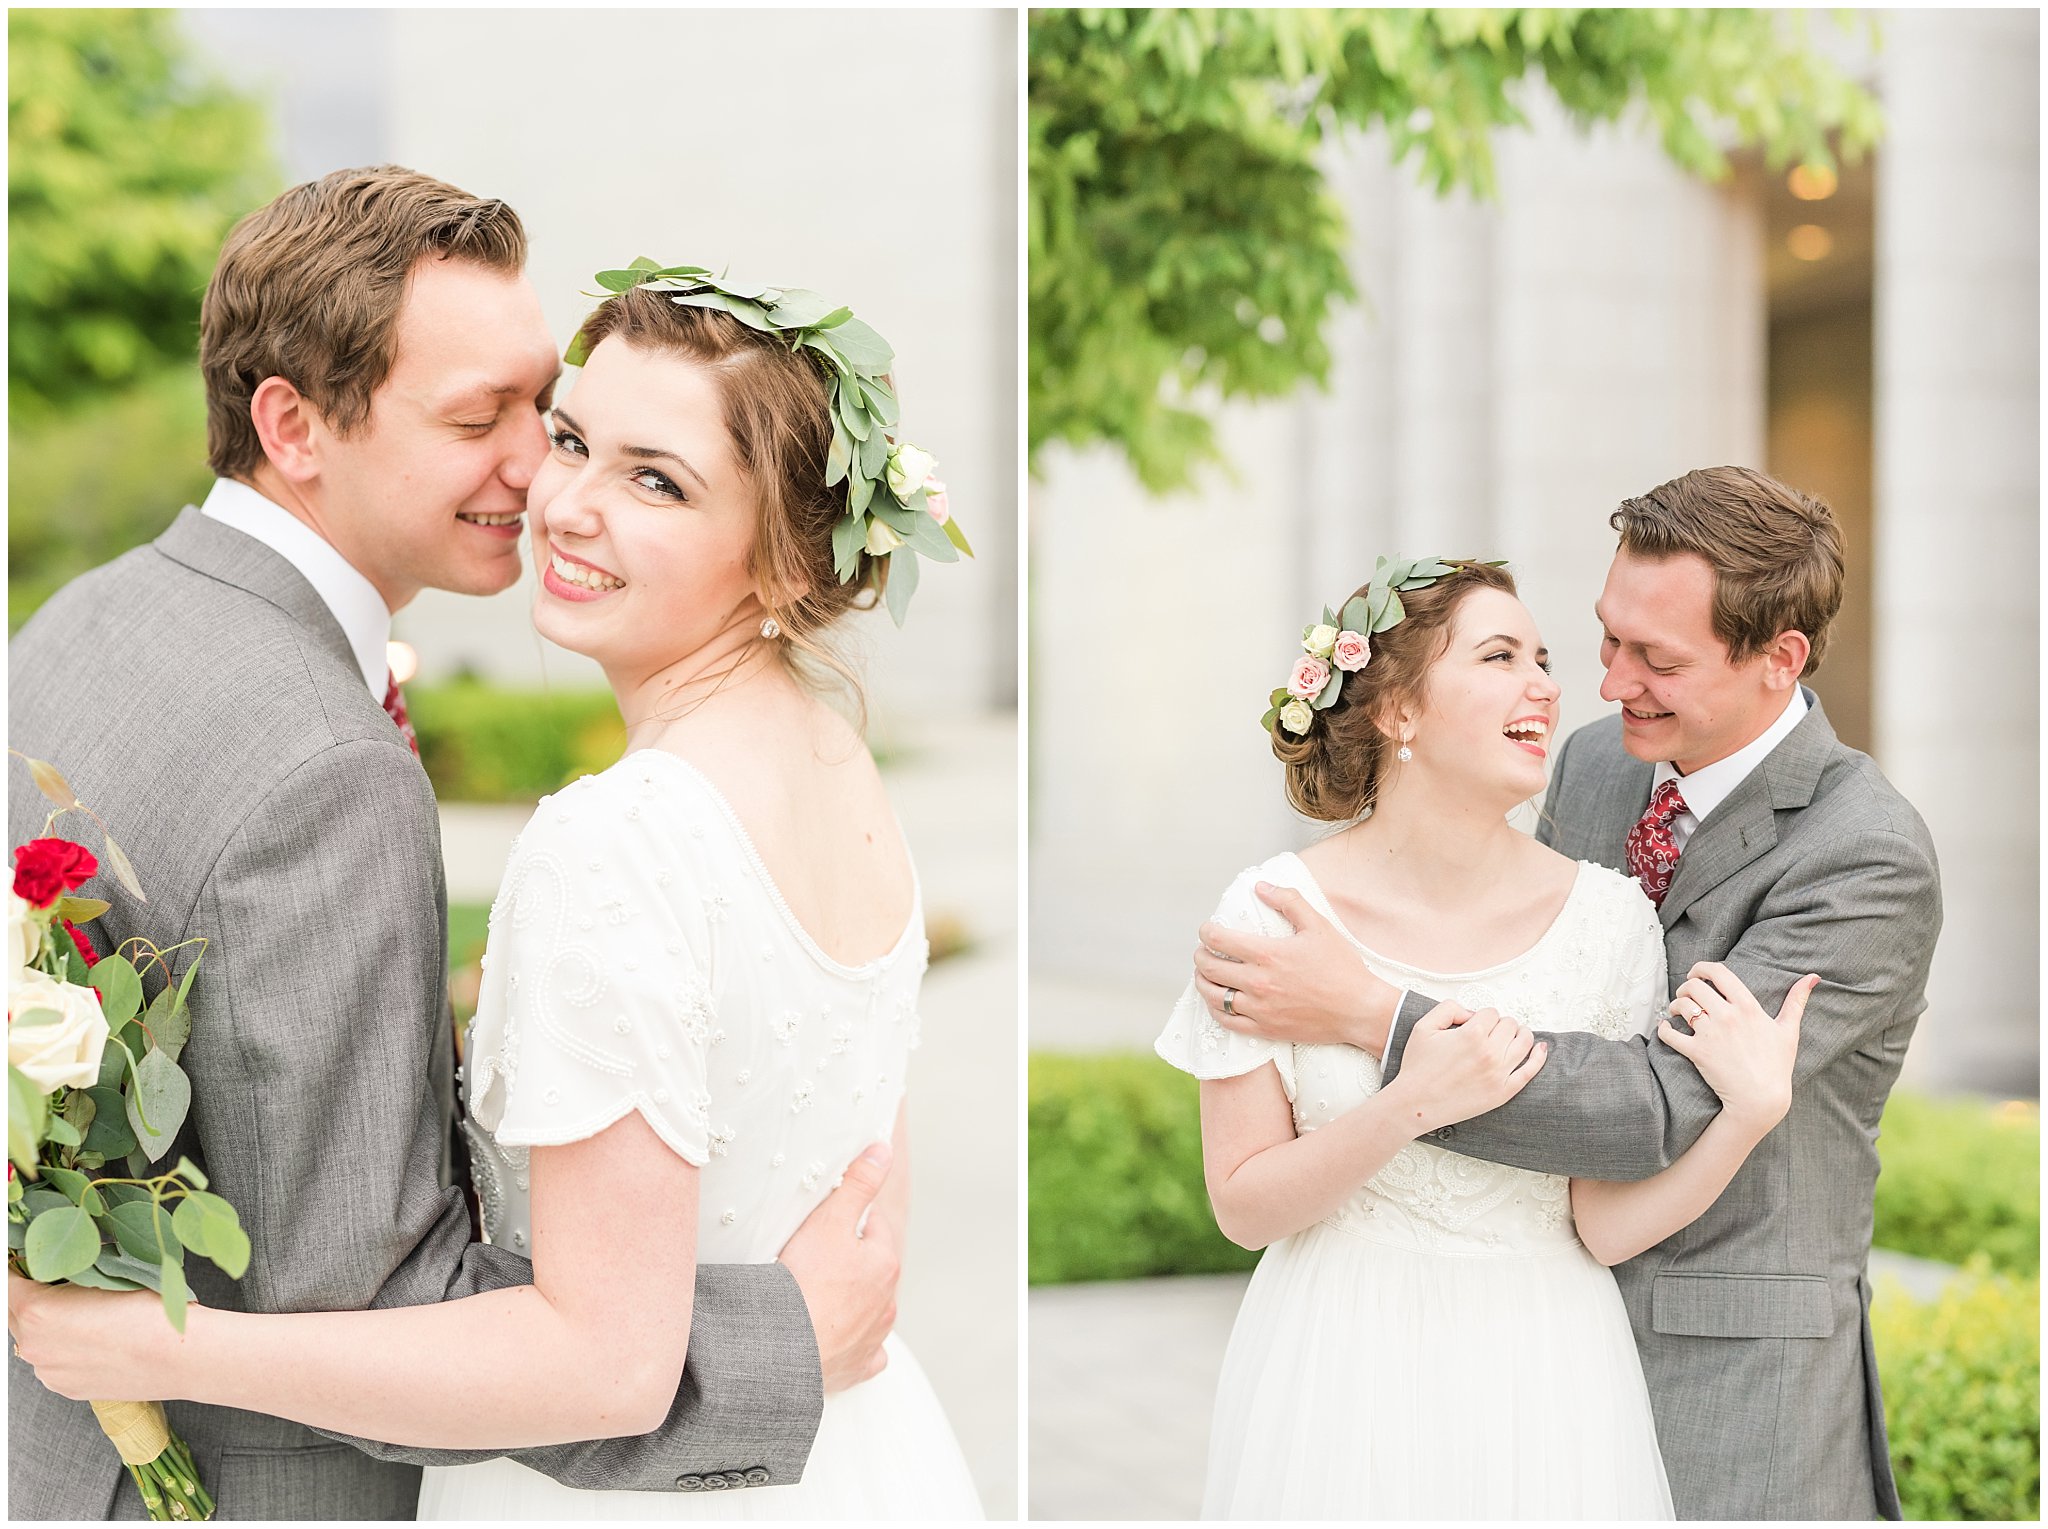 Bride and groom at the Draper Temple | Grey, Burgundy, and Gold Wedding | Draper Temple and South Mountain Wedding | Utah Wedding Photographers | Jessie and Dallin Photography